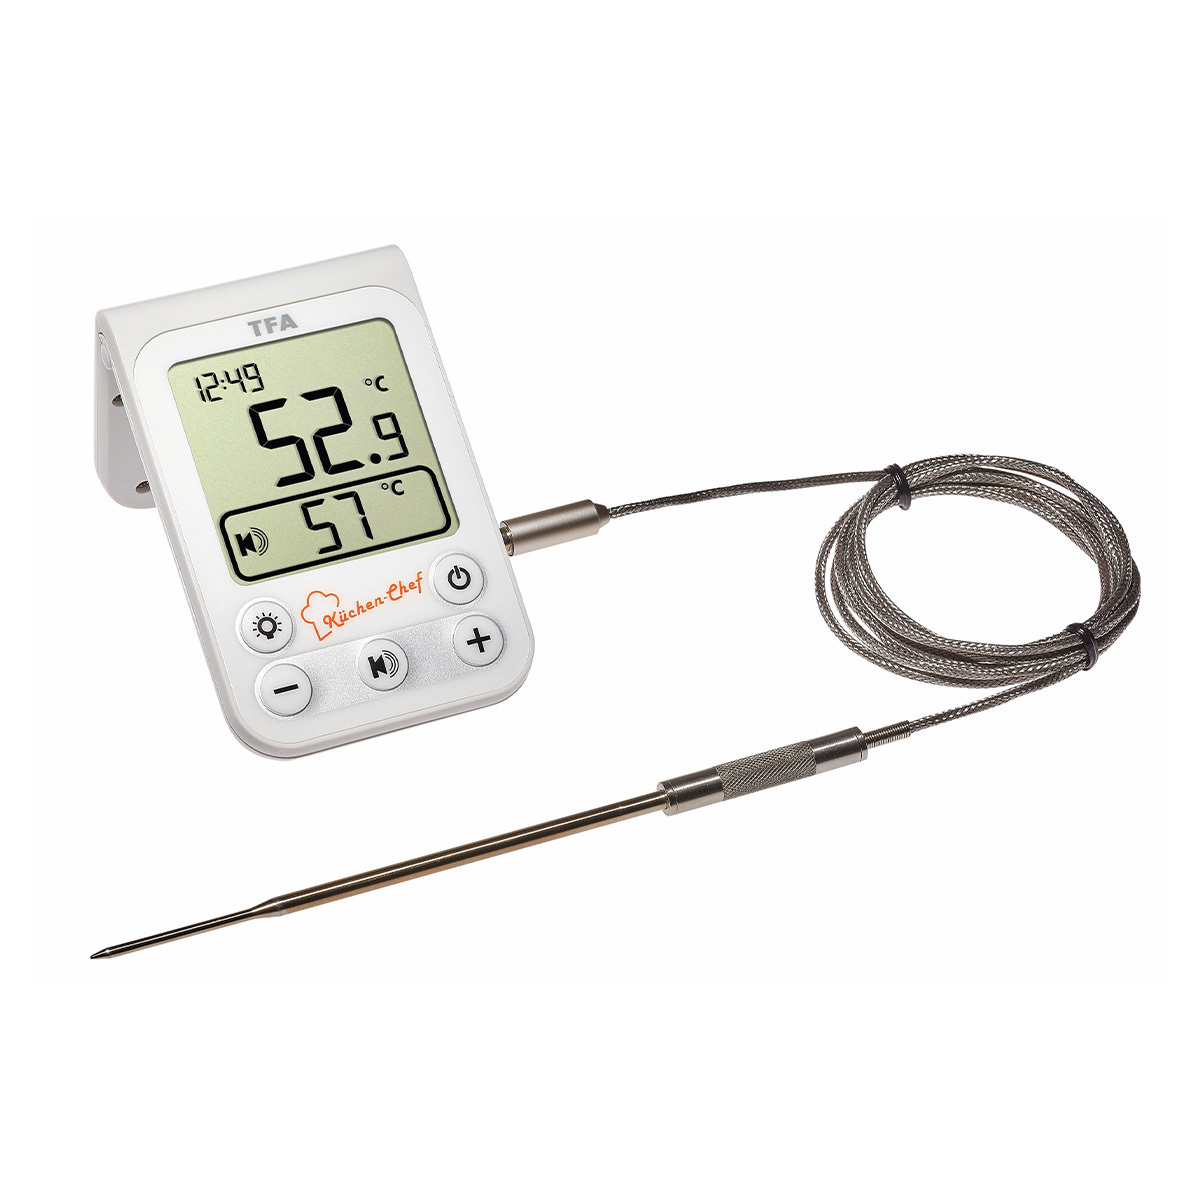 TureClos Food Meat Grill Stand Up Dial Oven Thermometer Stainless Steel  Kitchen Baking Temperature Meter Tester